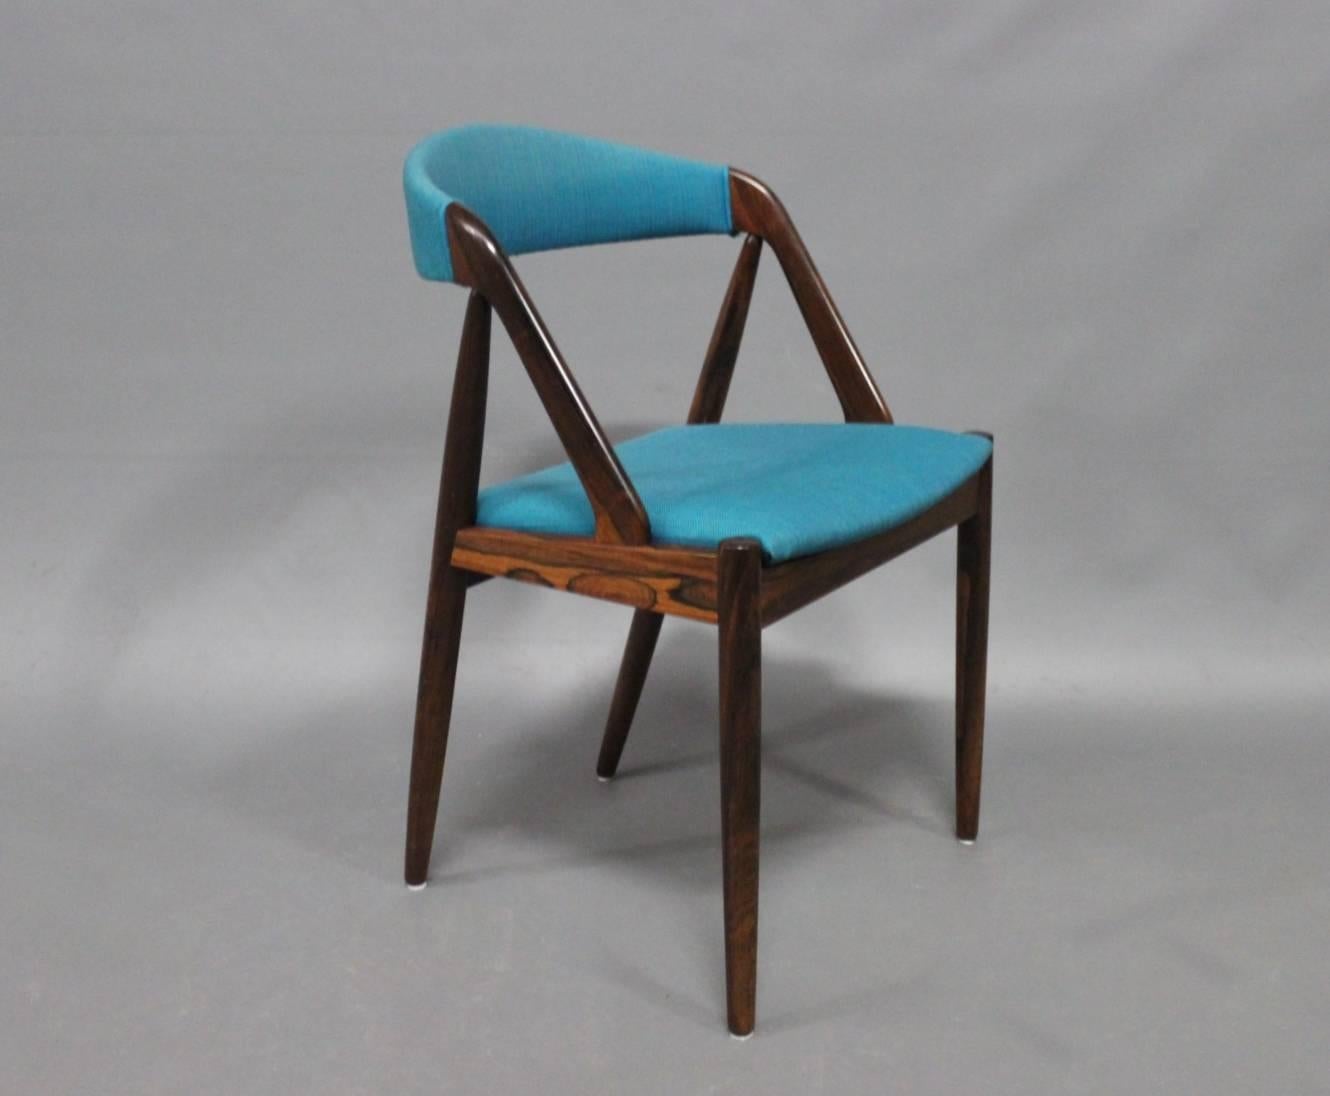 A set of six dining room chairs, model 31, designed by Kai Kristiansen in 1956 and manufactured by Schou Andersen in the 1960s. The chairs are in rosewood and upholstered in blue fabric.